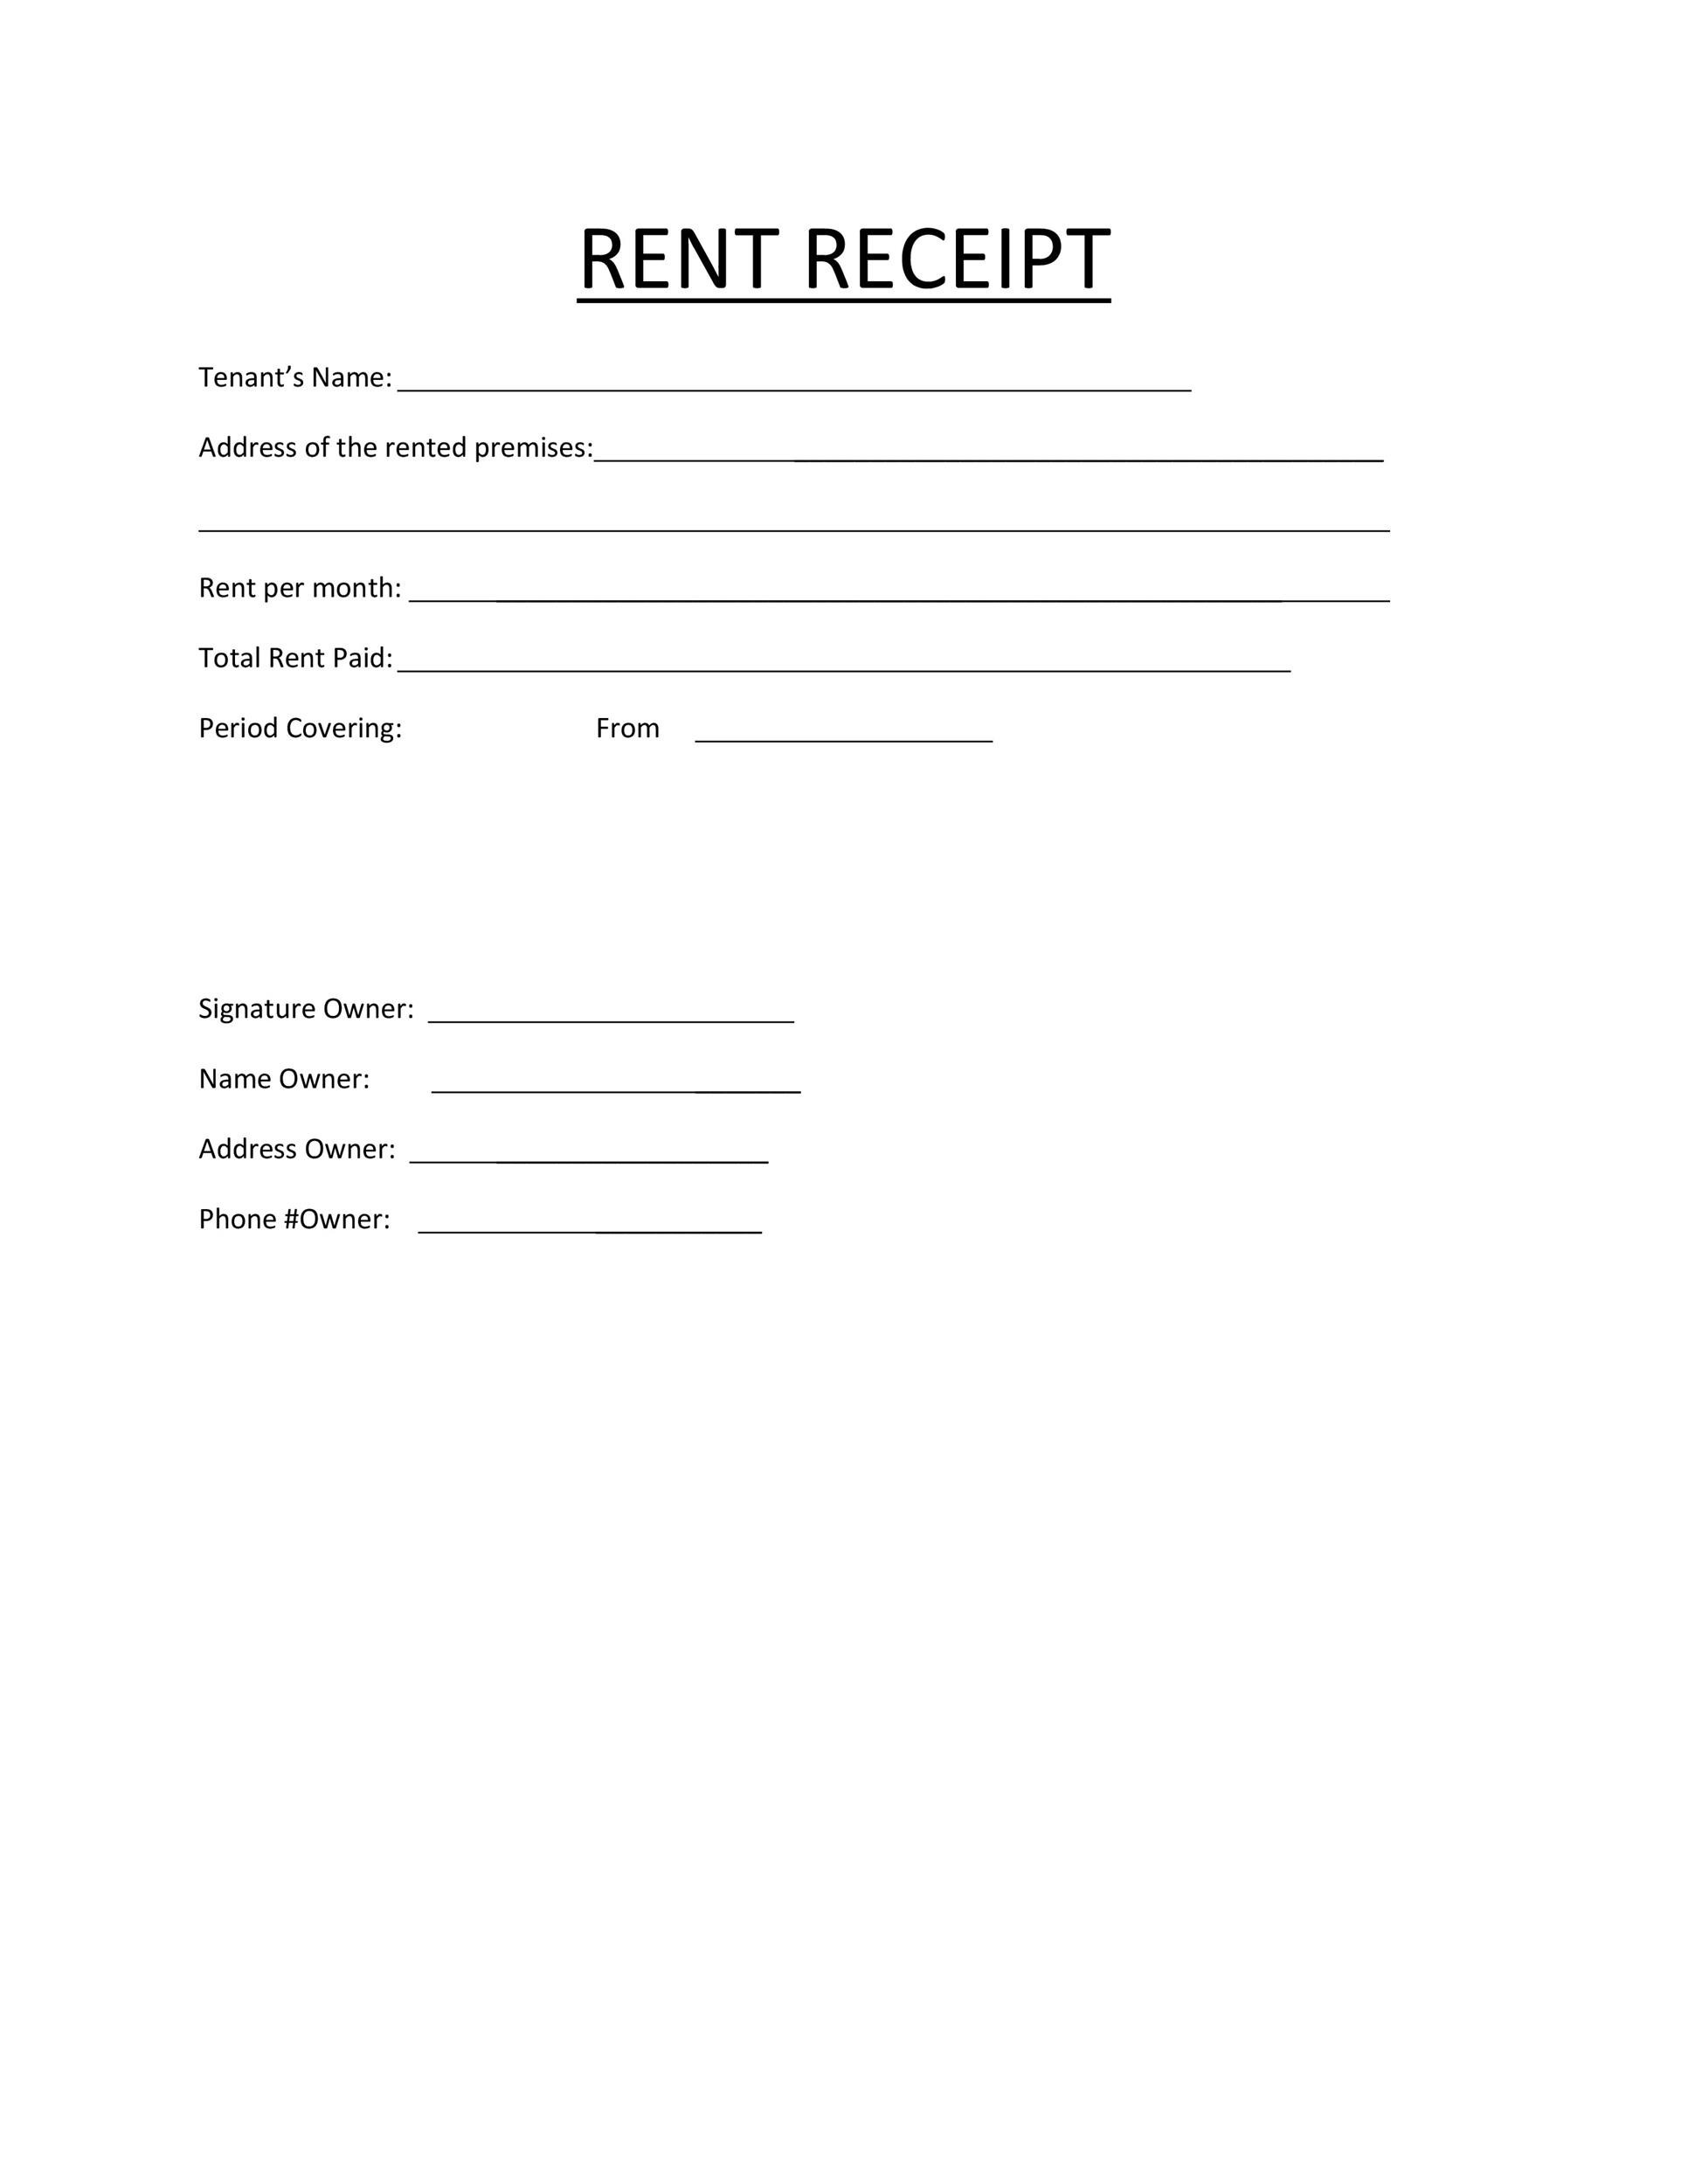 Monthly Rent Receipt Templates Great Printable Receipt Templates